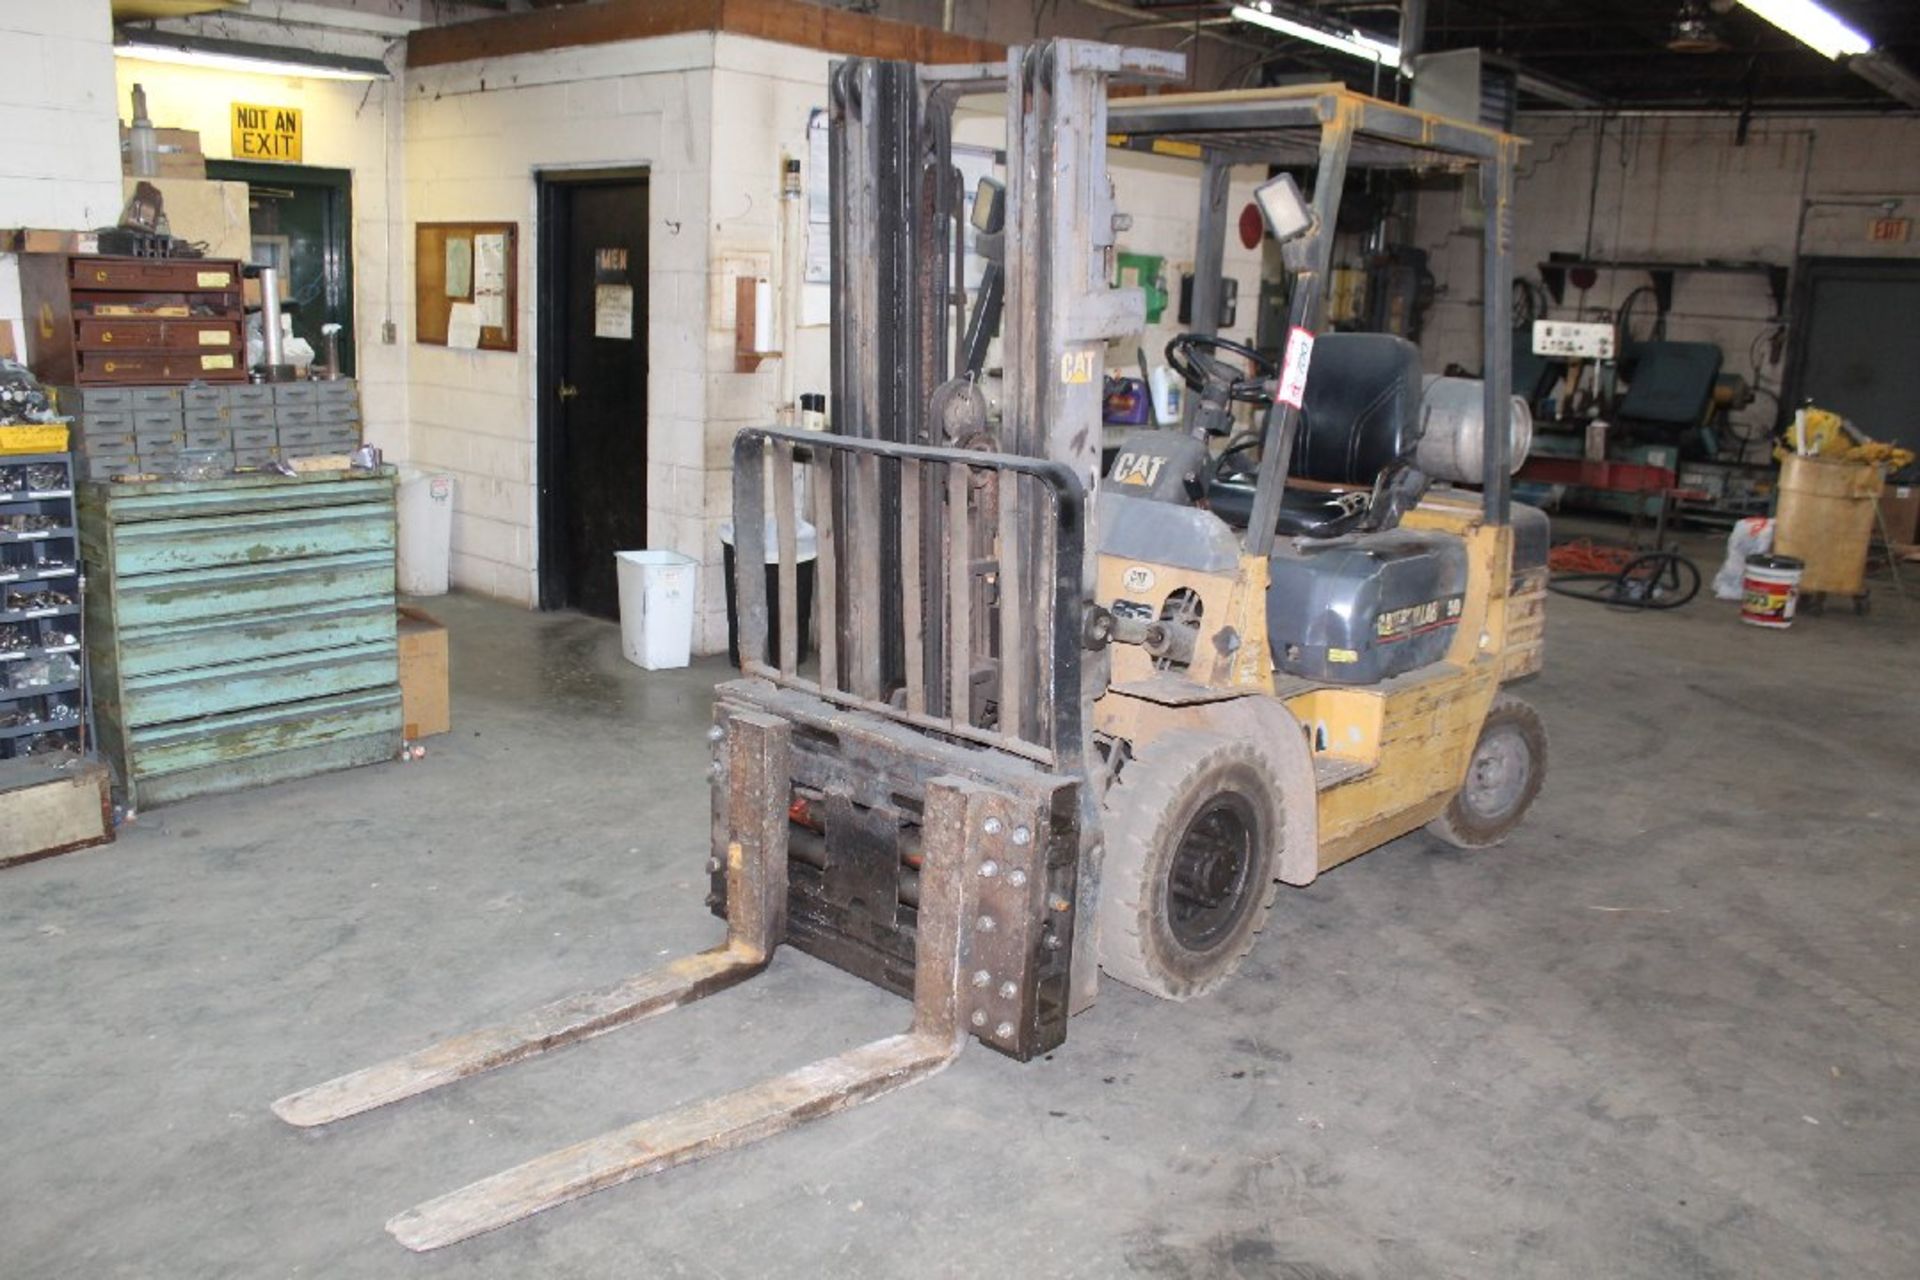 CAT Forklift, LP Gas, Pneumatic Tires (Good Condition), Model TP 25, 5,000 Pound Capacity, 138in